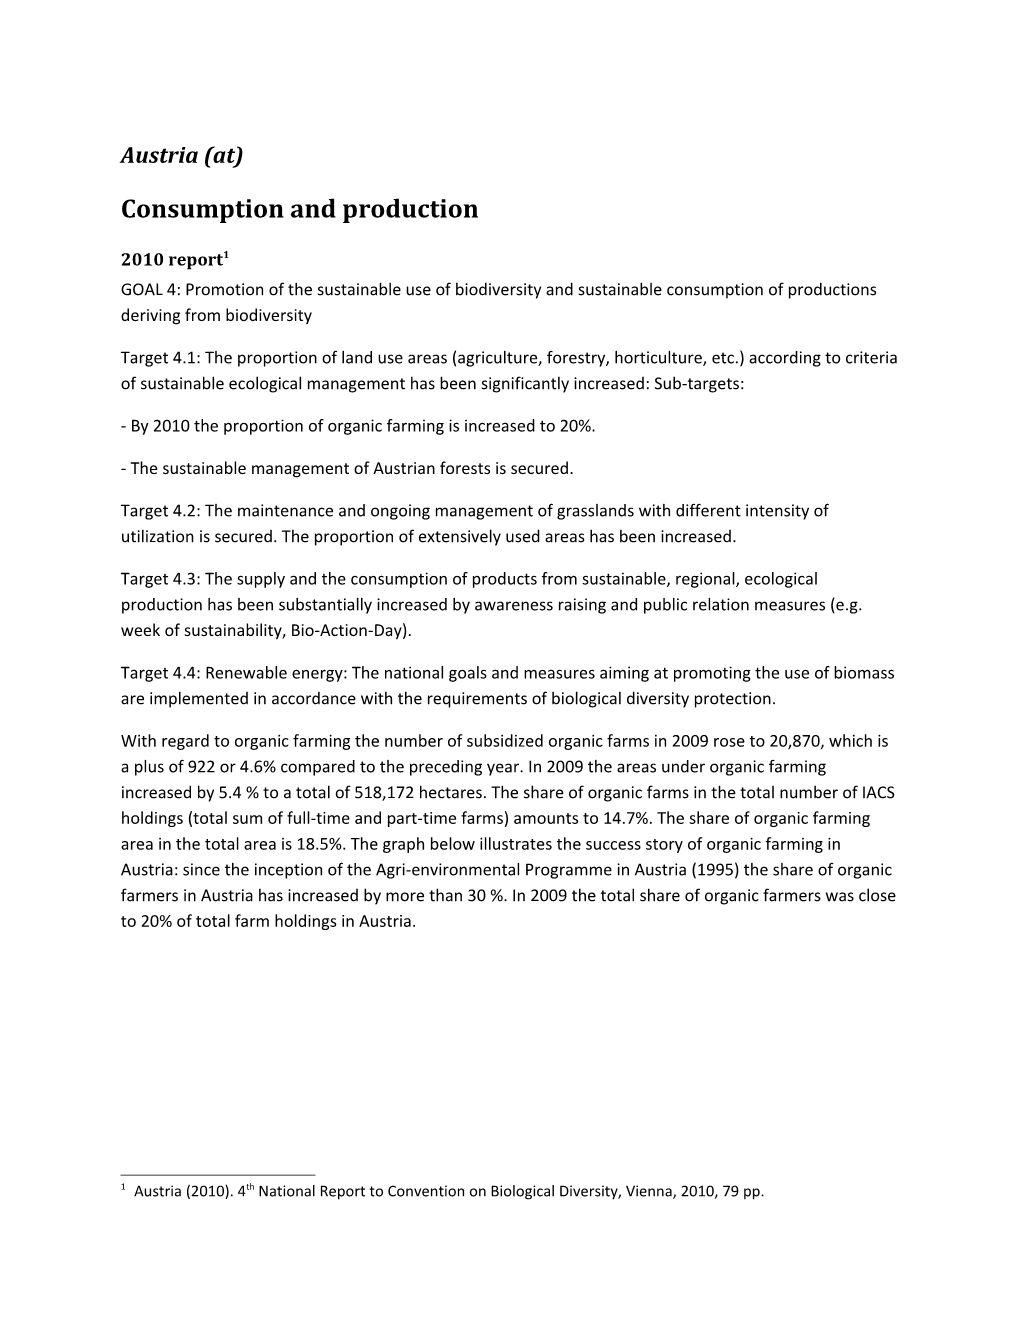 Consumption and Production